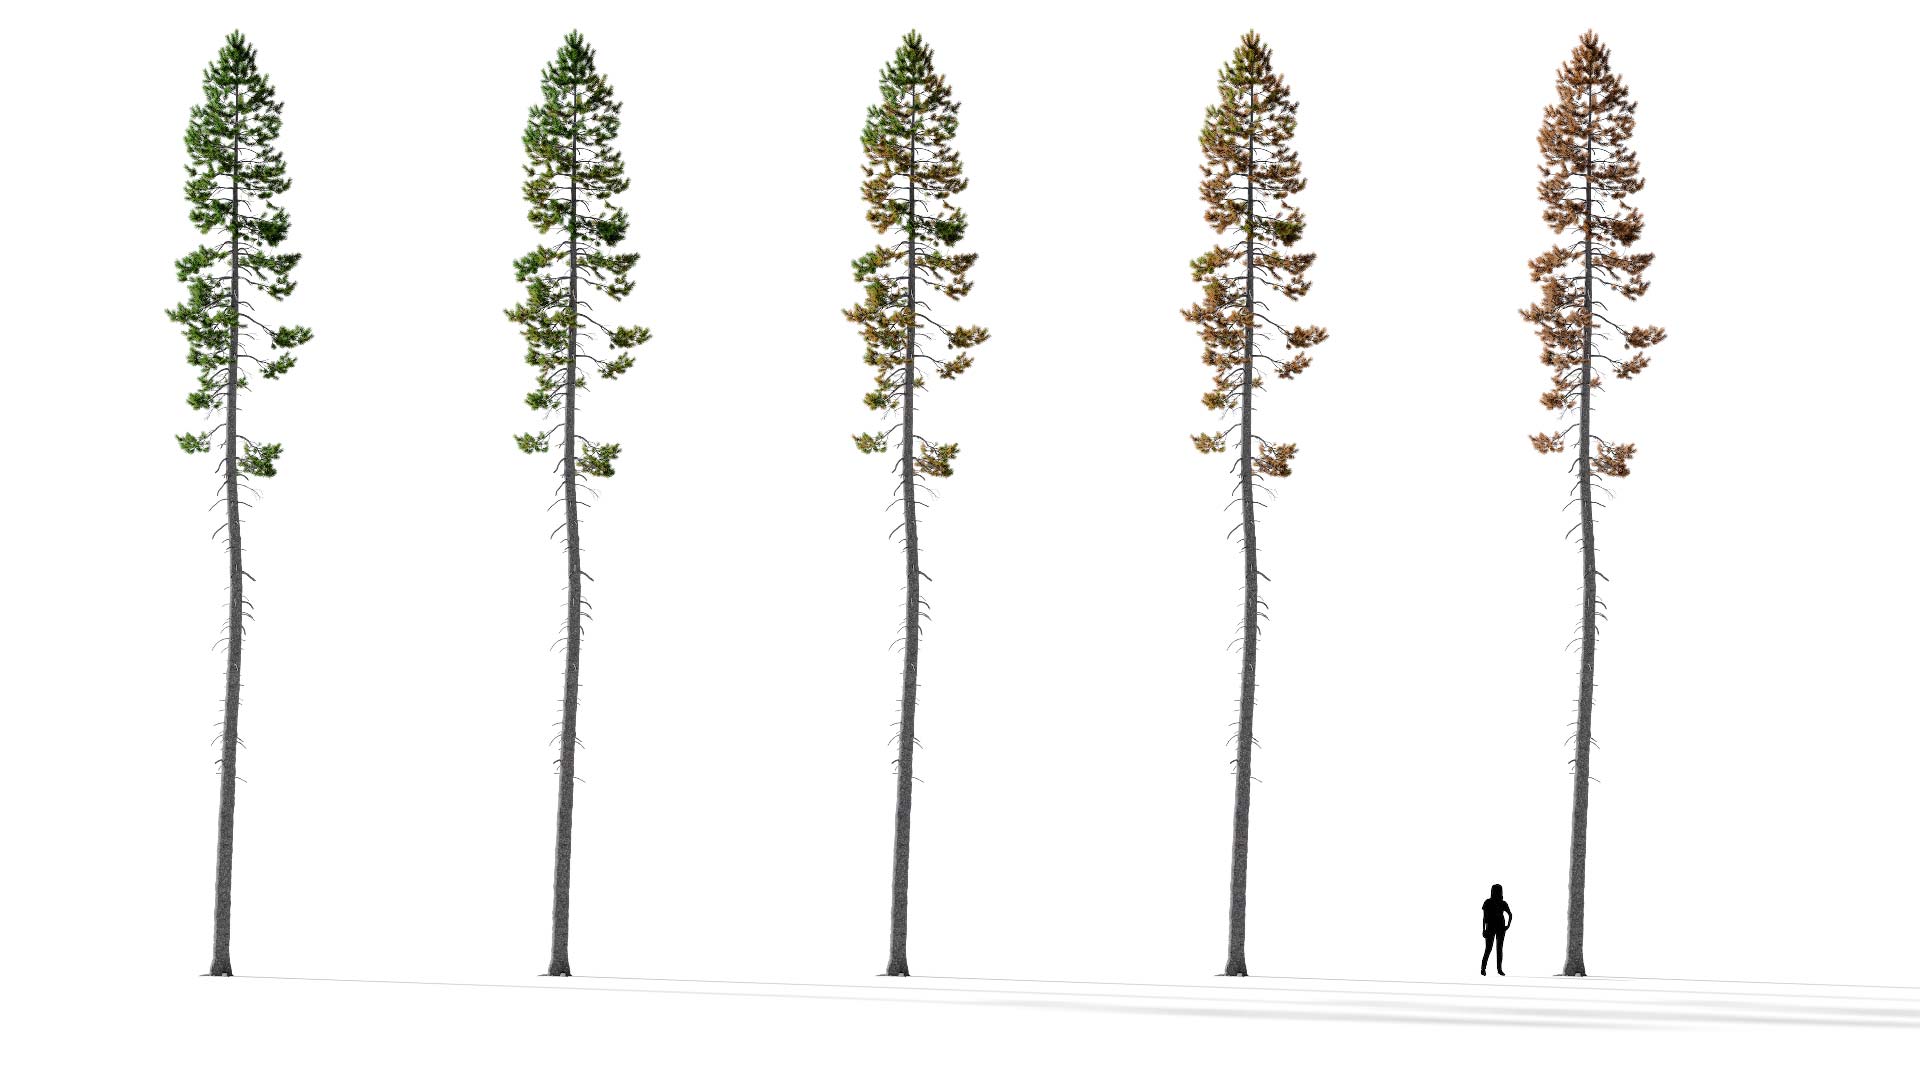 3D model of the Rocky Mountain lodgepole pine forest Pinus contorta var latifolia forest health variations